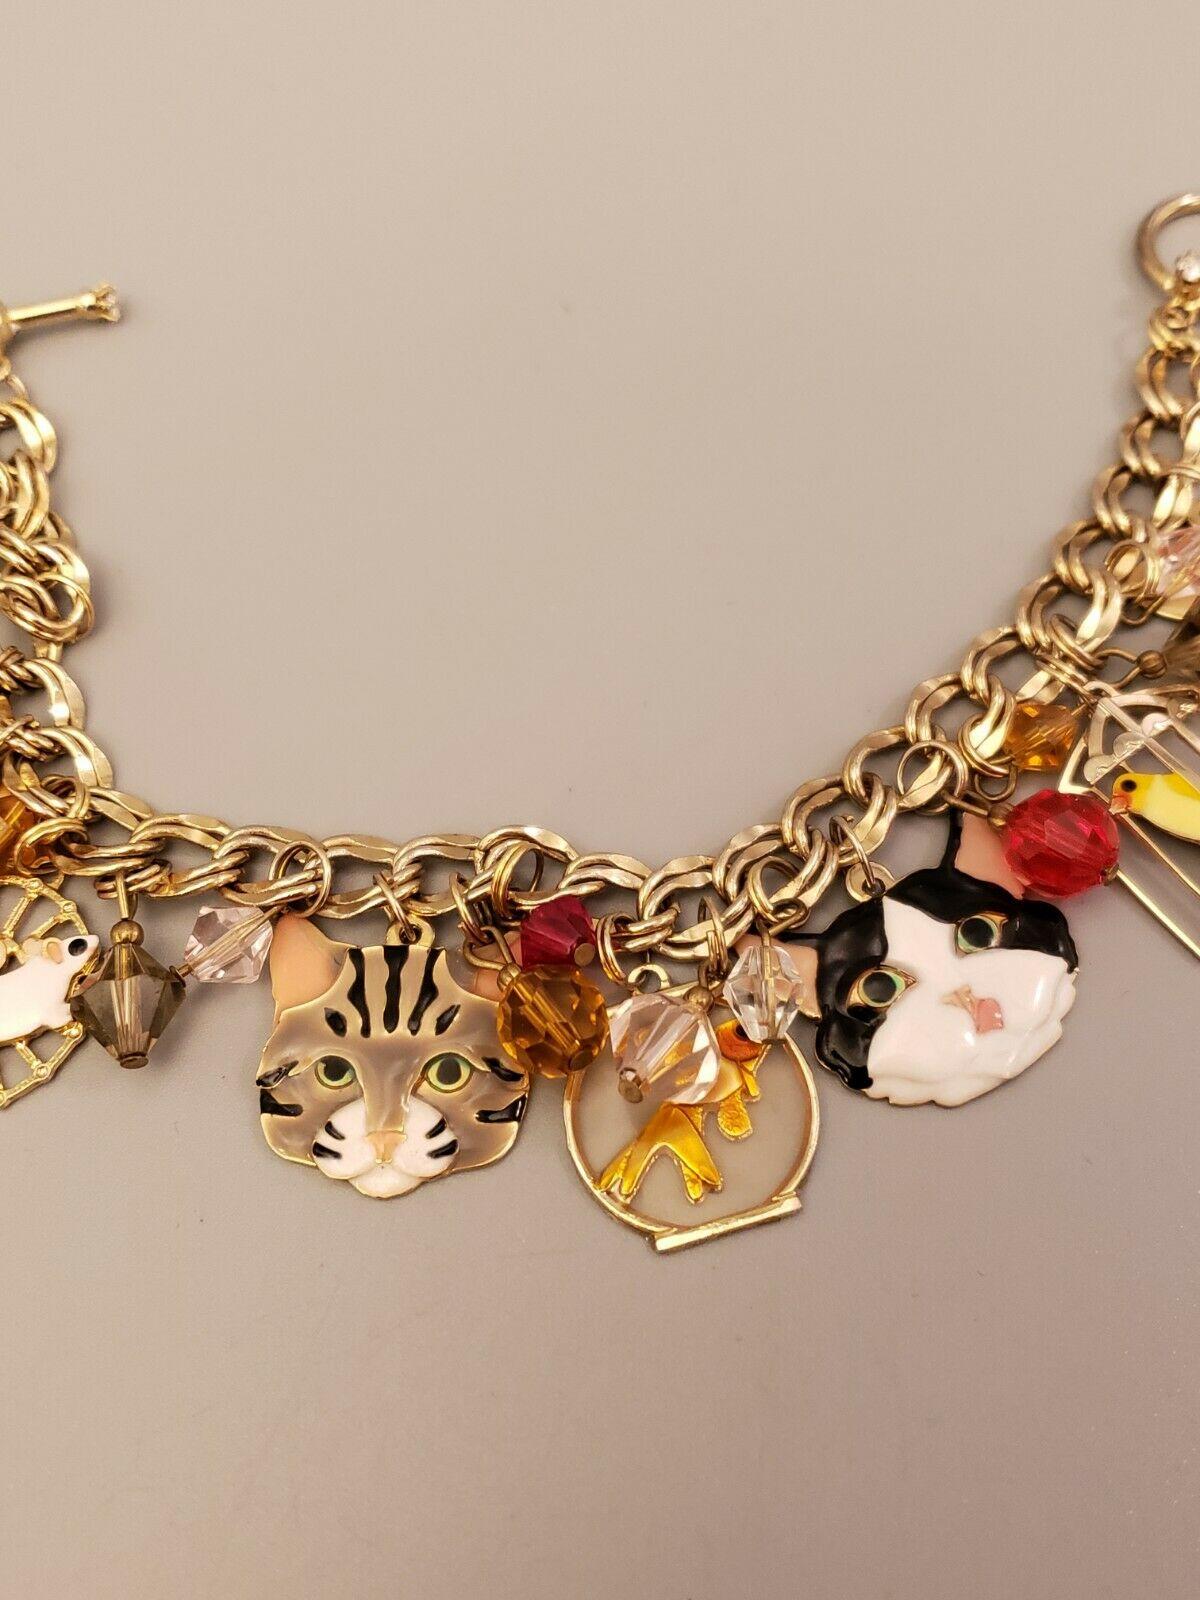 Delightful Vintage Signed Lunch at the Ritz Multi Charm Cat, Mouse and Bird in a Cage Bracelet. Enamel, Gold Tone. Approx. 7.5” Long. Excellent Condition. Chic and Fun to Wear…Sure to be admired...The perfect accessory for the Modern Woman!  
